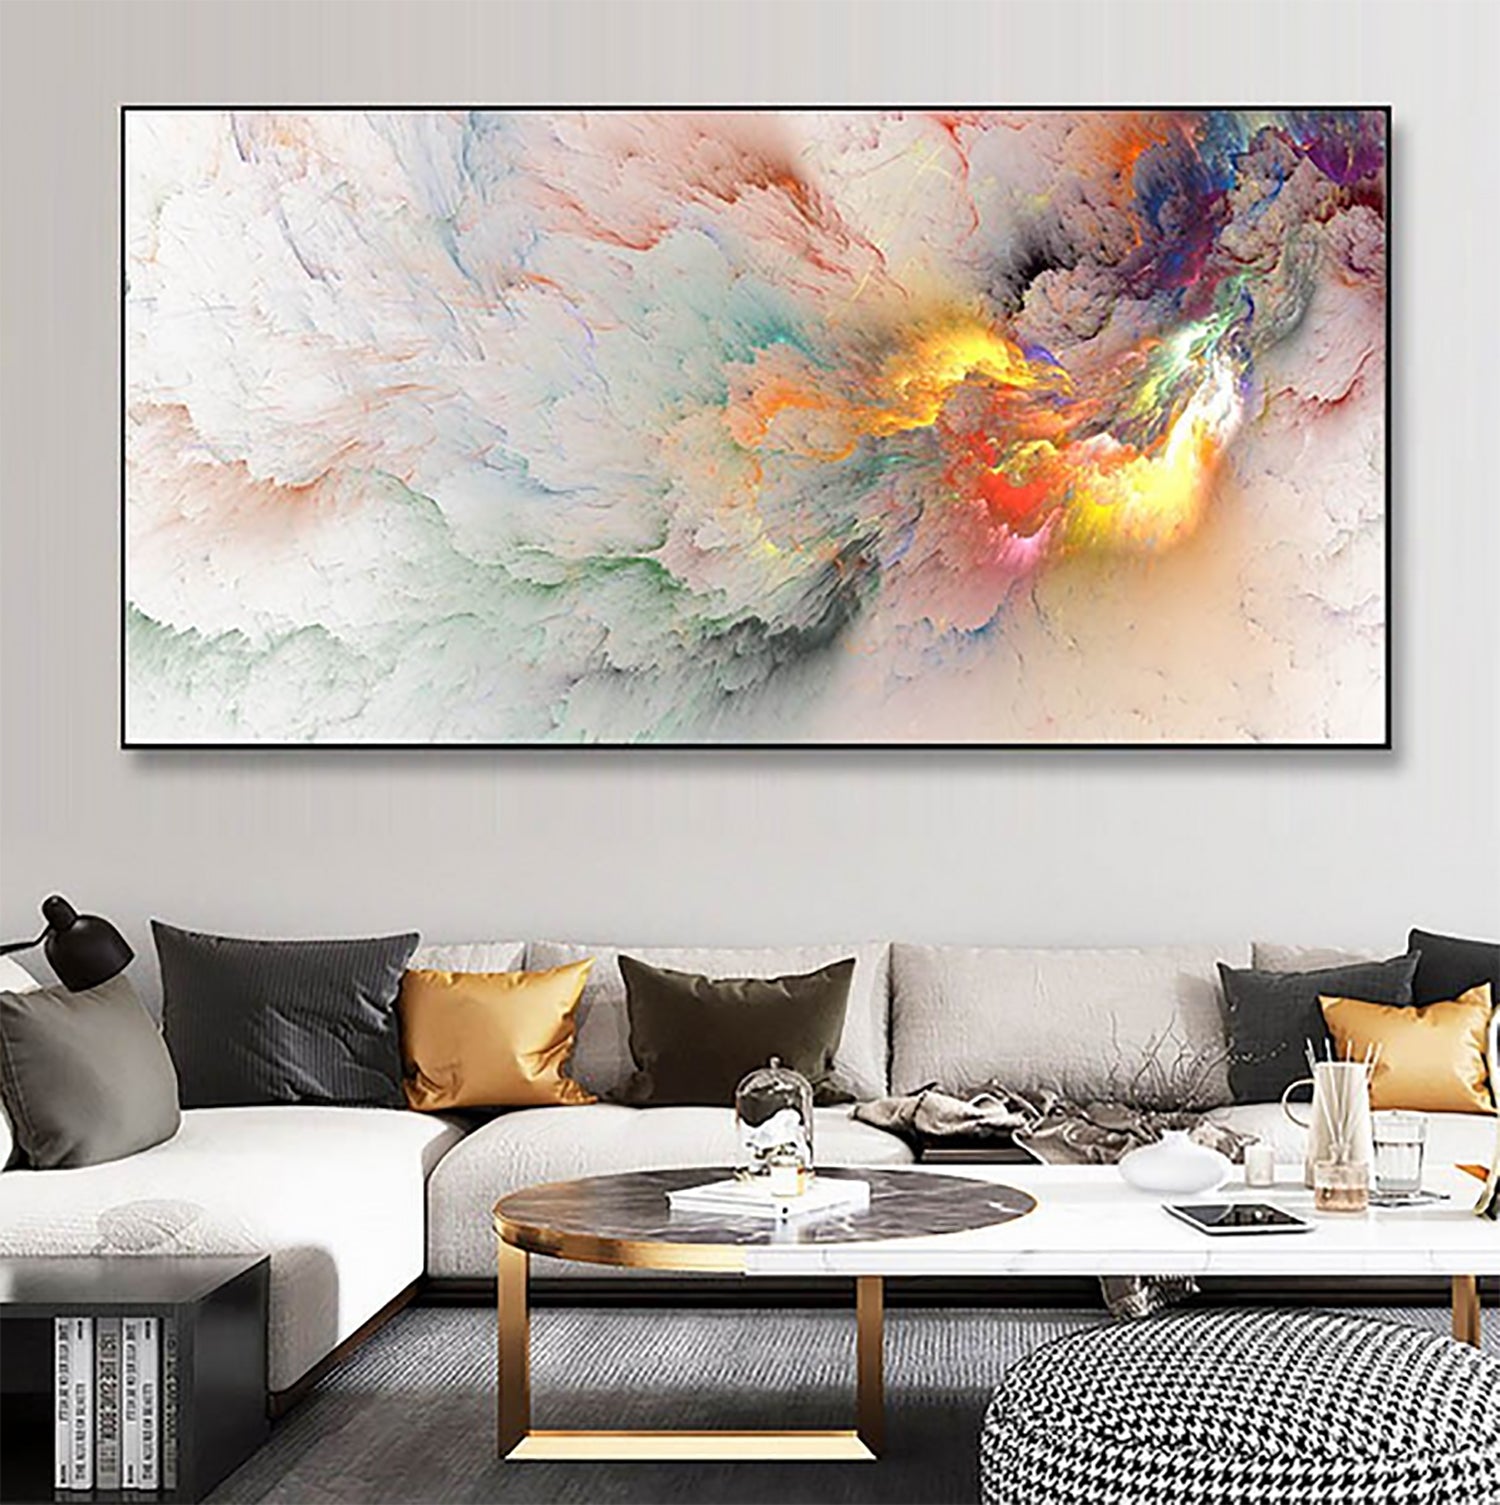 TPFLiving Poster Canvas / Colorful Various – / Traumpreisfabrik Abstract - Sizes - Clouds